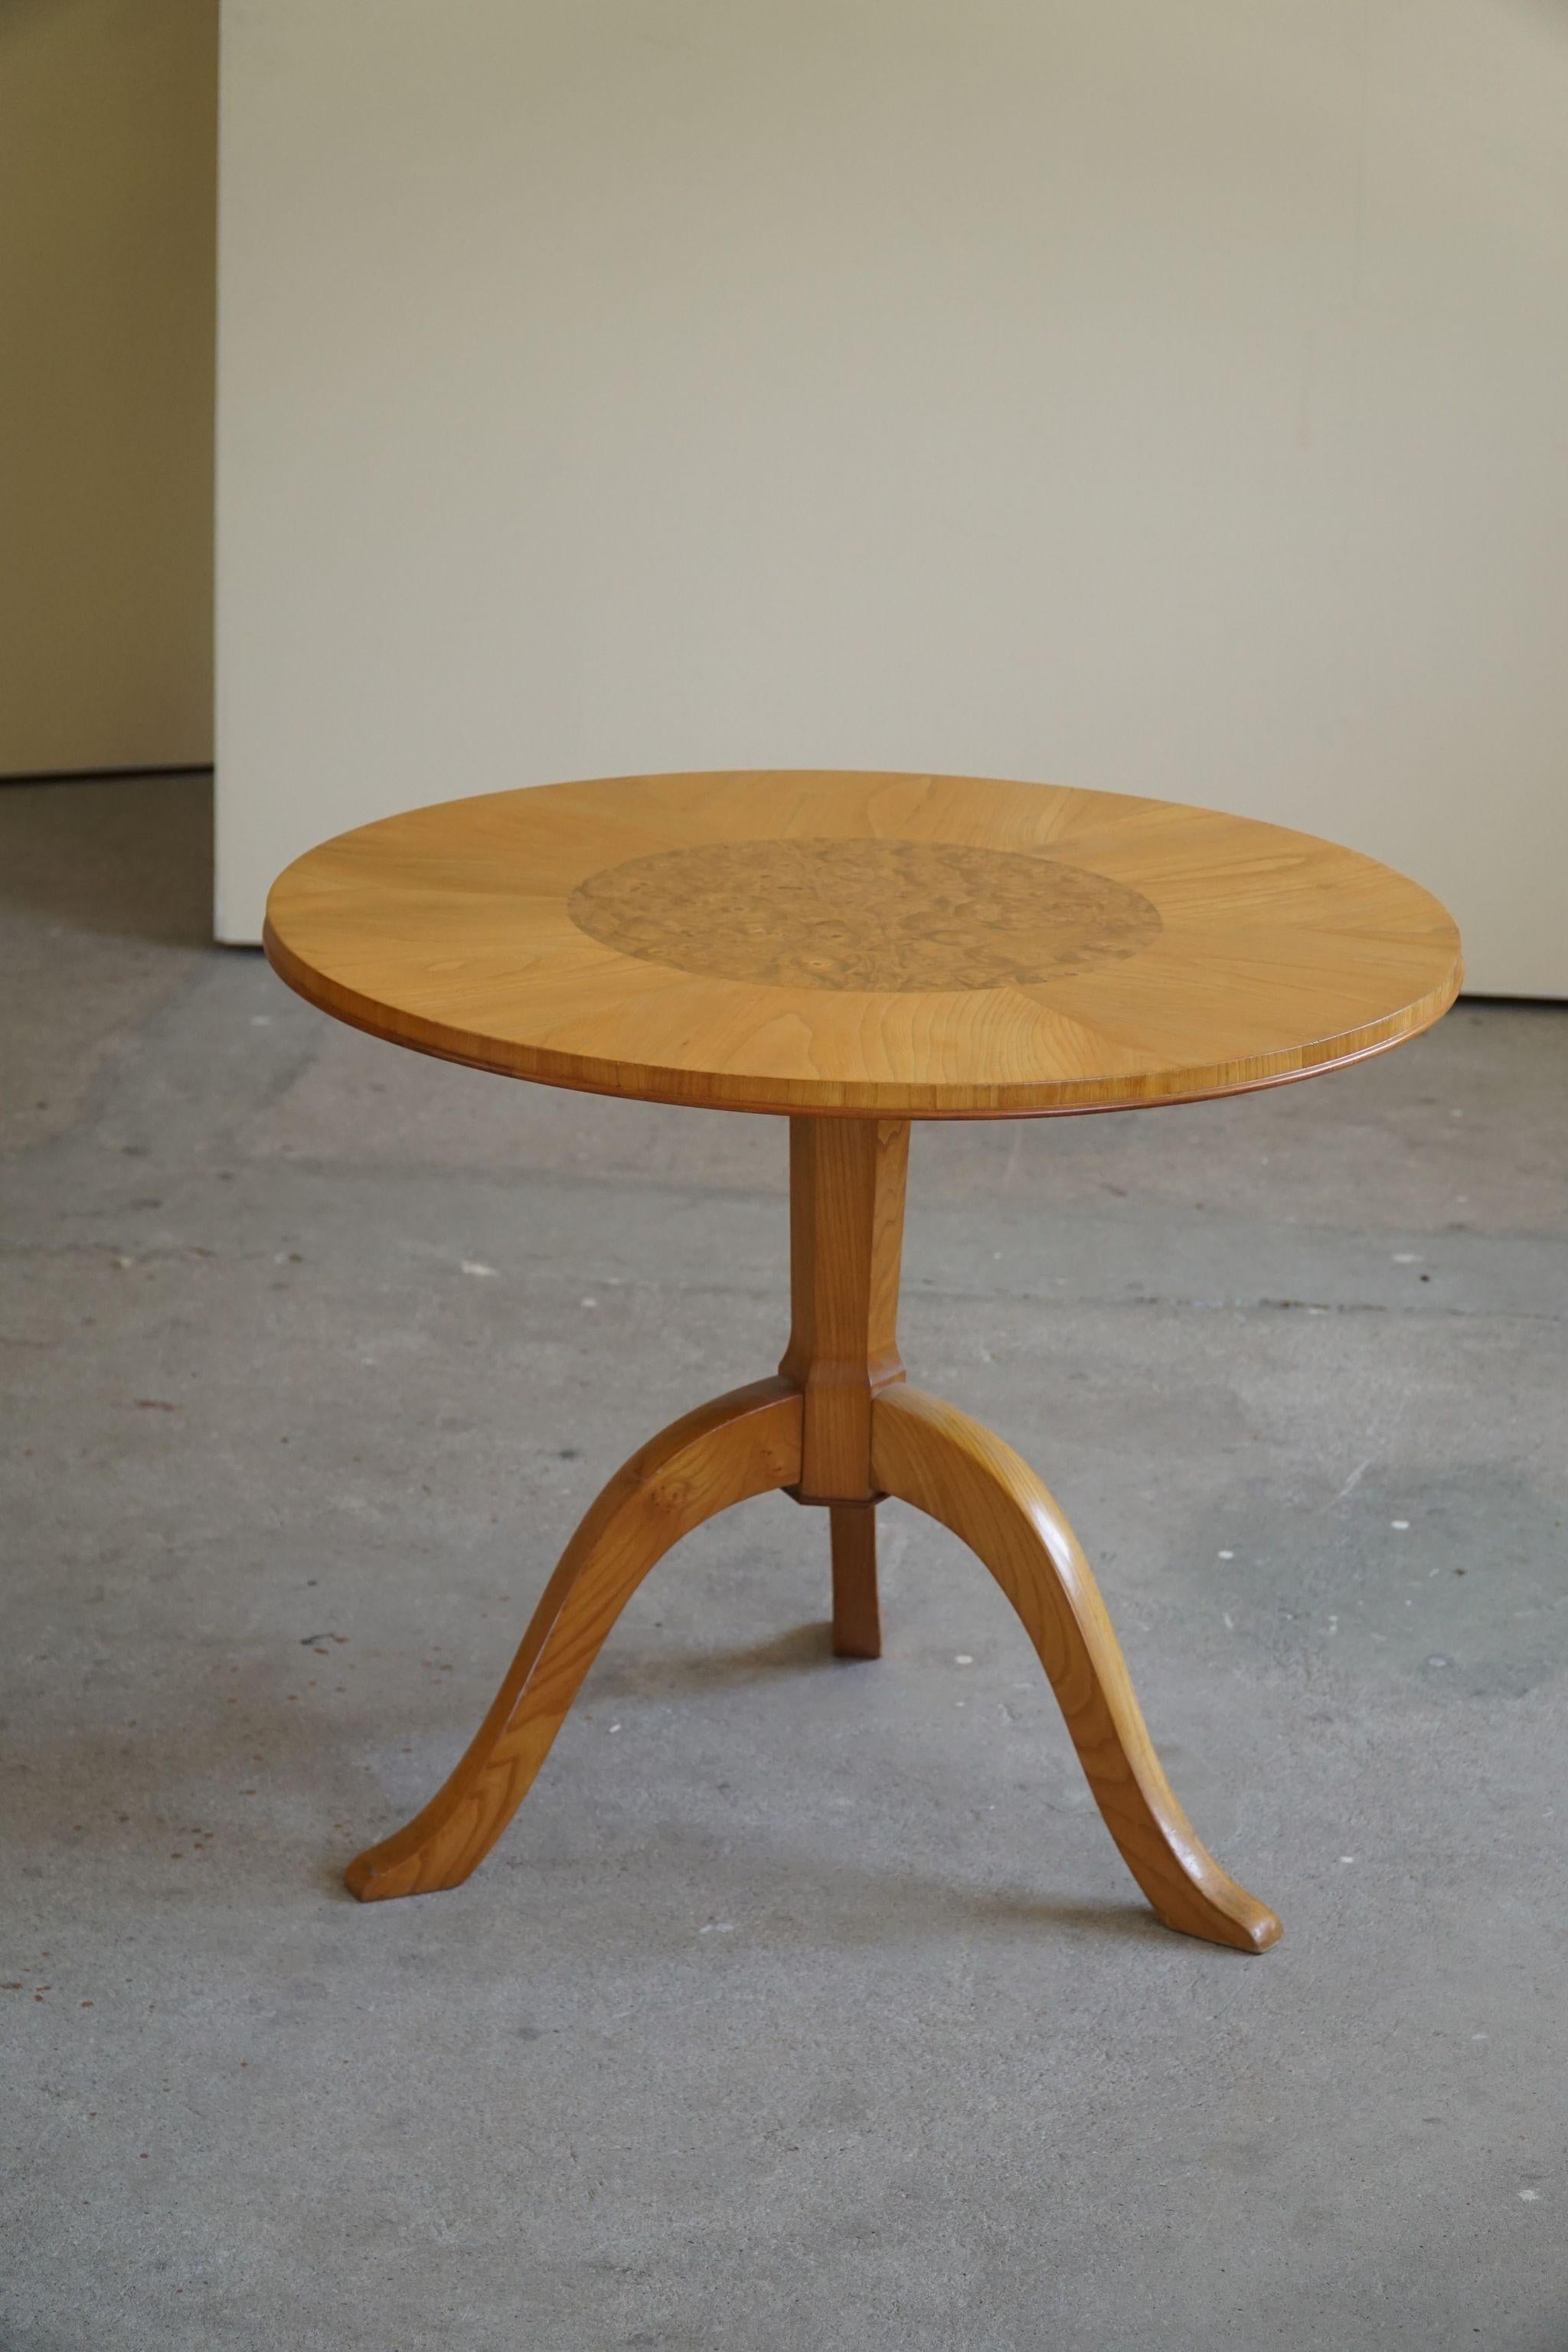 A classic round Art Deco side table / pedestal in elm and birchroot. Made by a Swedish Cabinetmaker in 1940s.
Fine and decadent design, beautiful veener work in this vintage piece.
The overall impression is fantastic.

